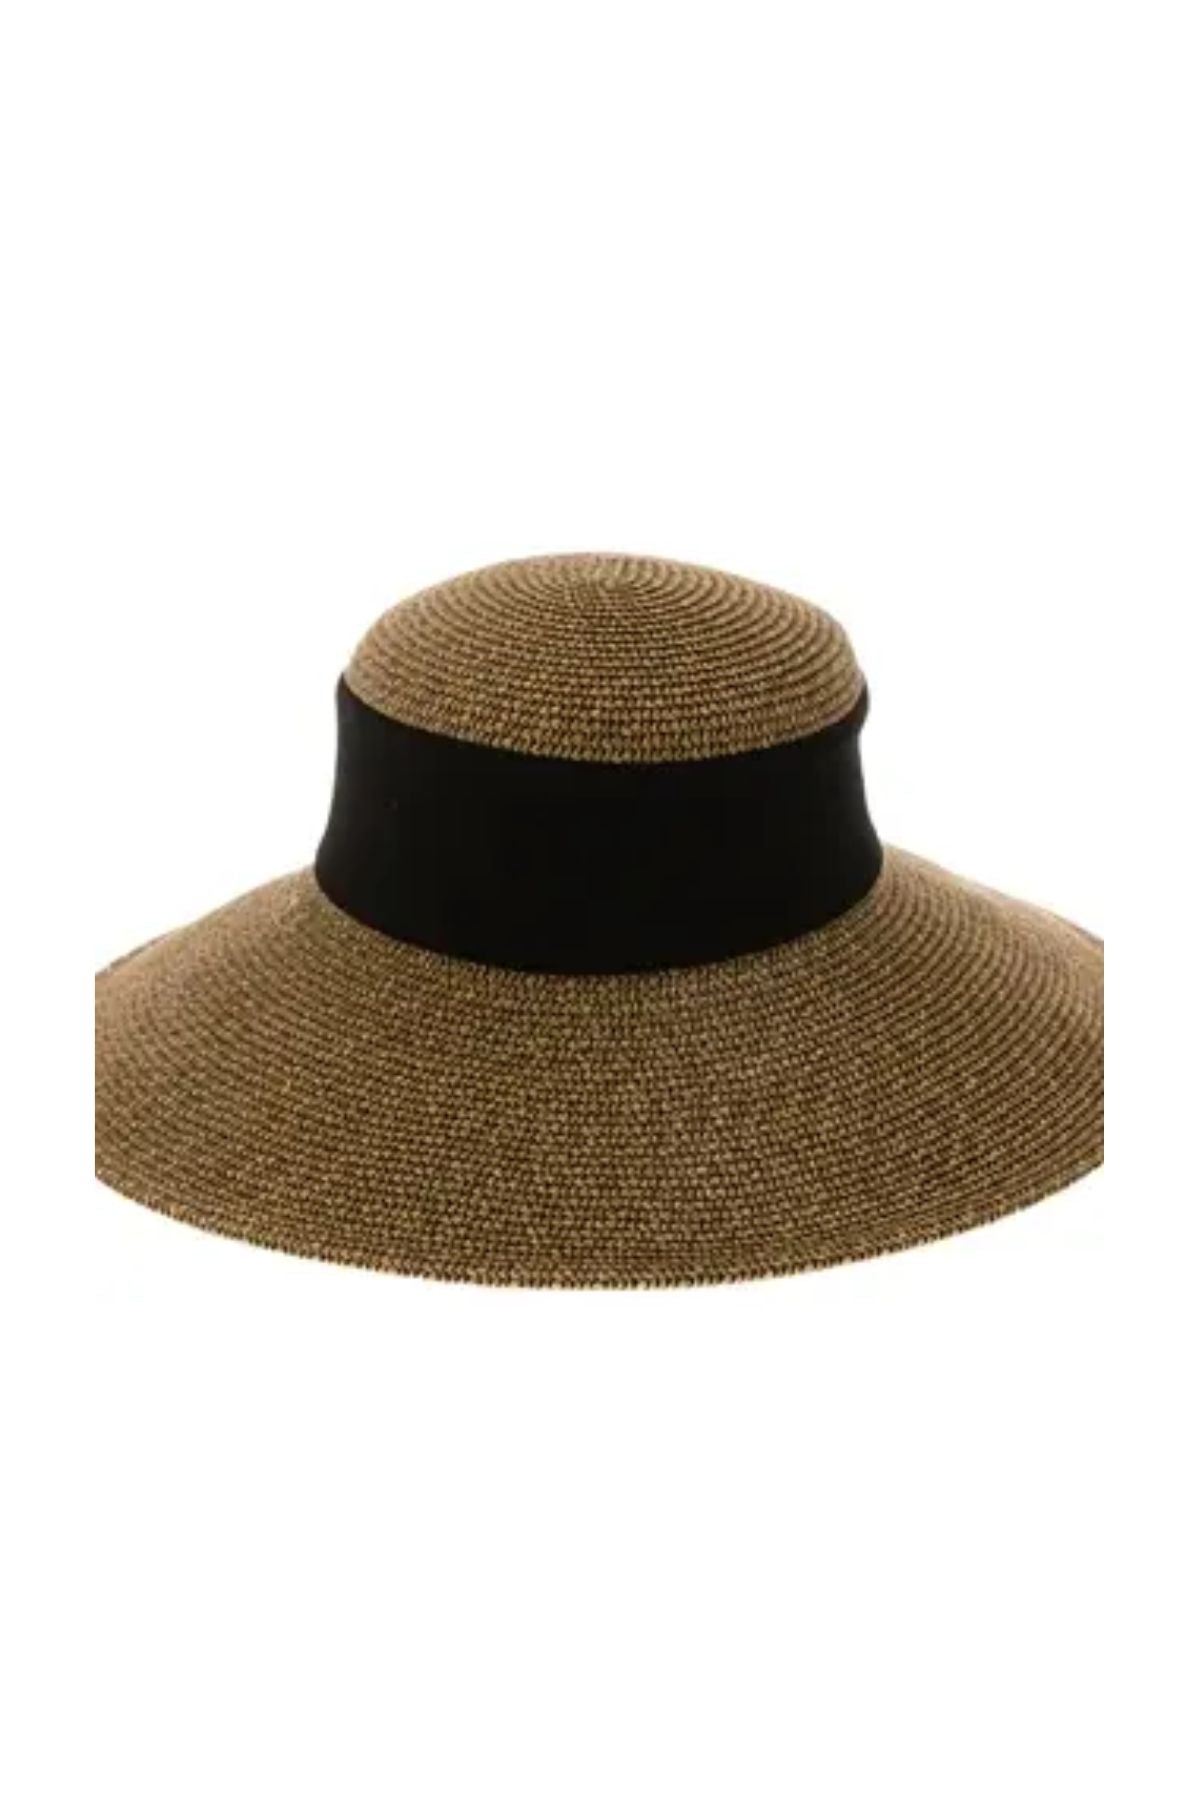 Collapsible Straw Sun Hat